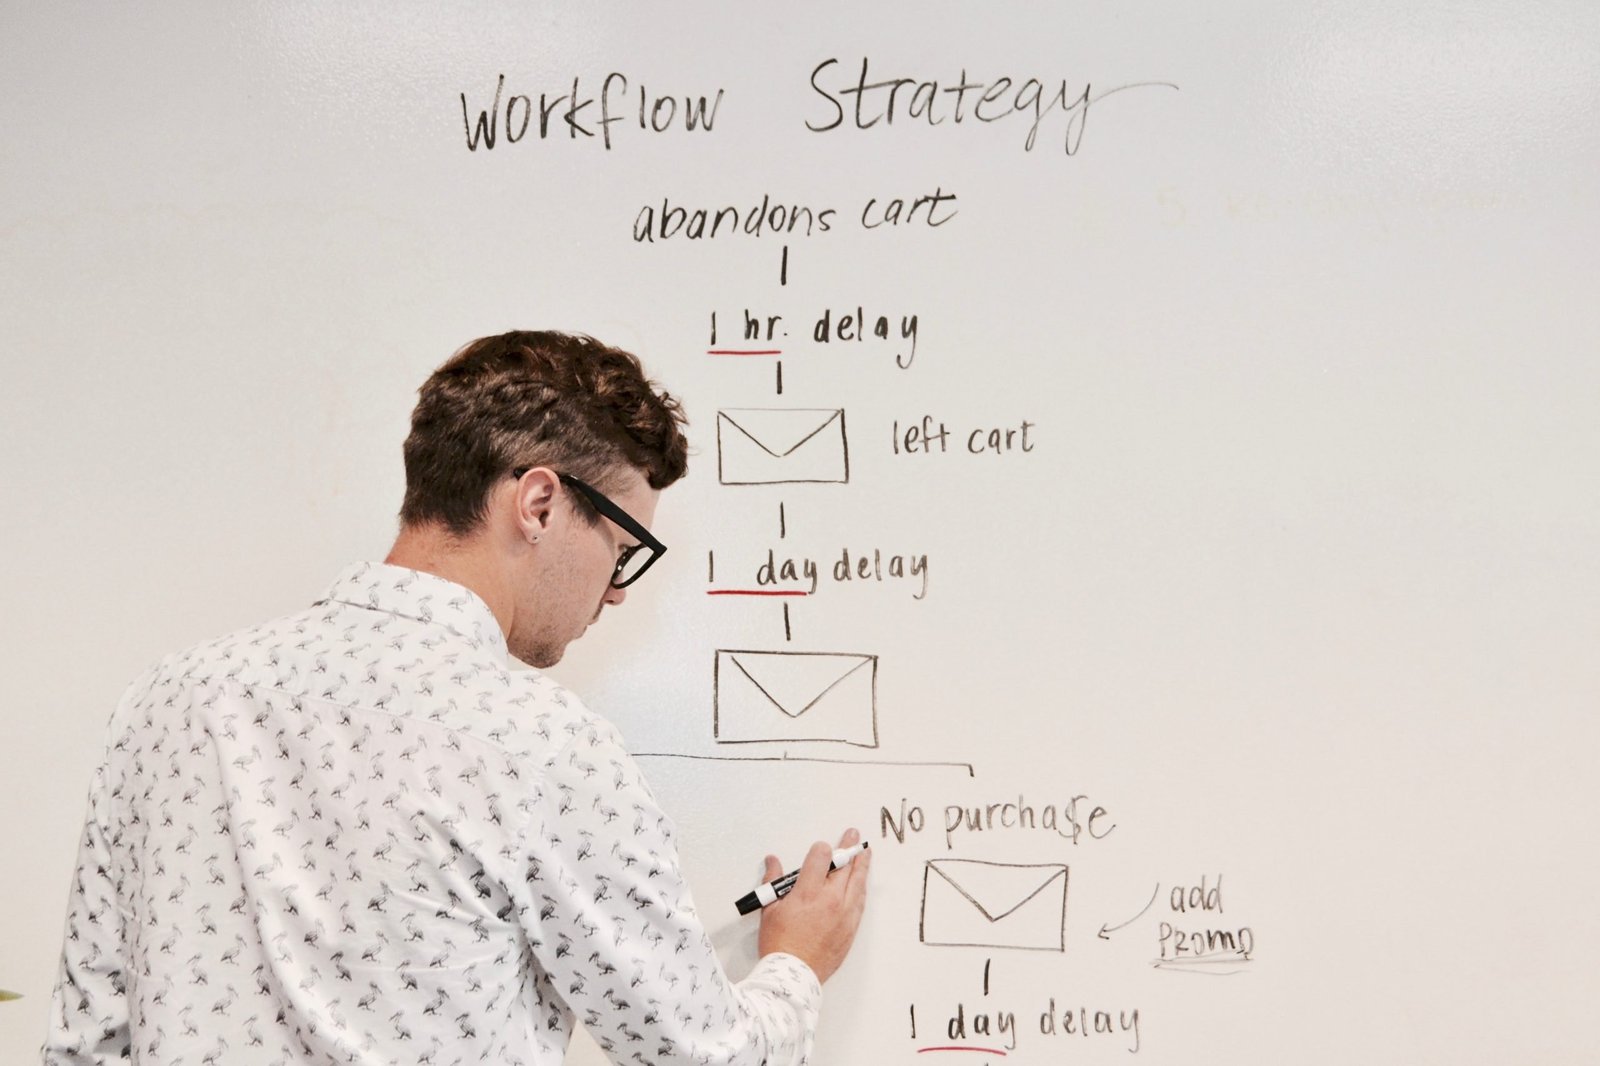 A man writing out a workflow strategy on a whiteboard